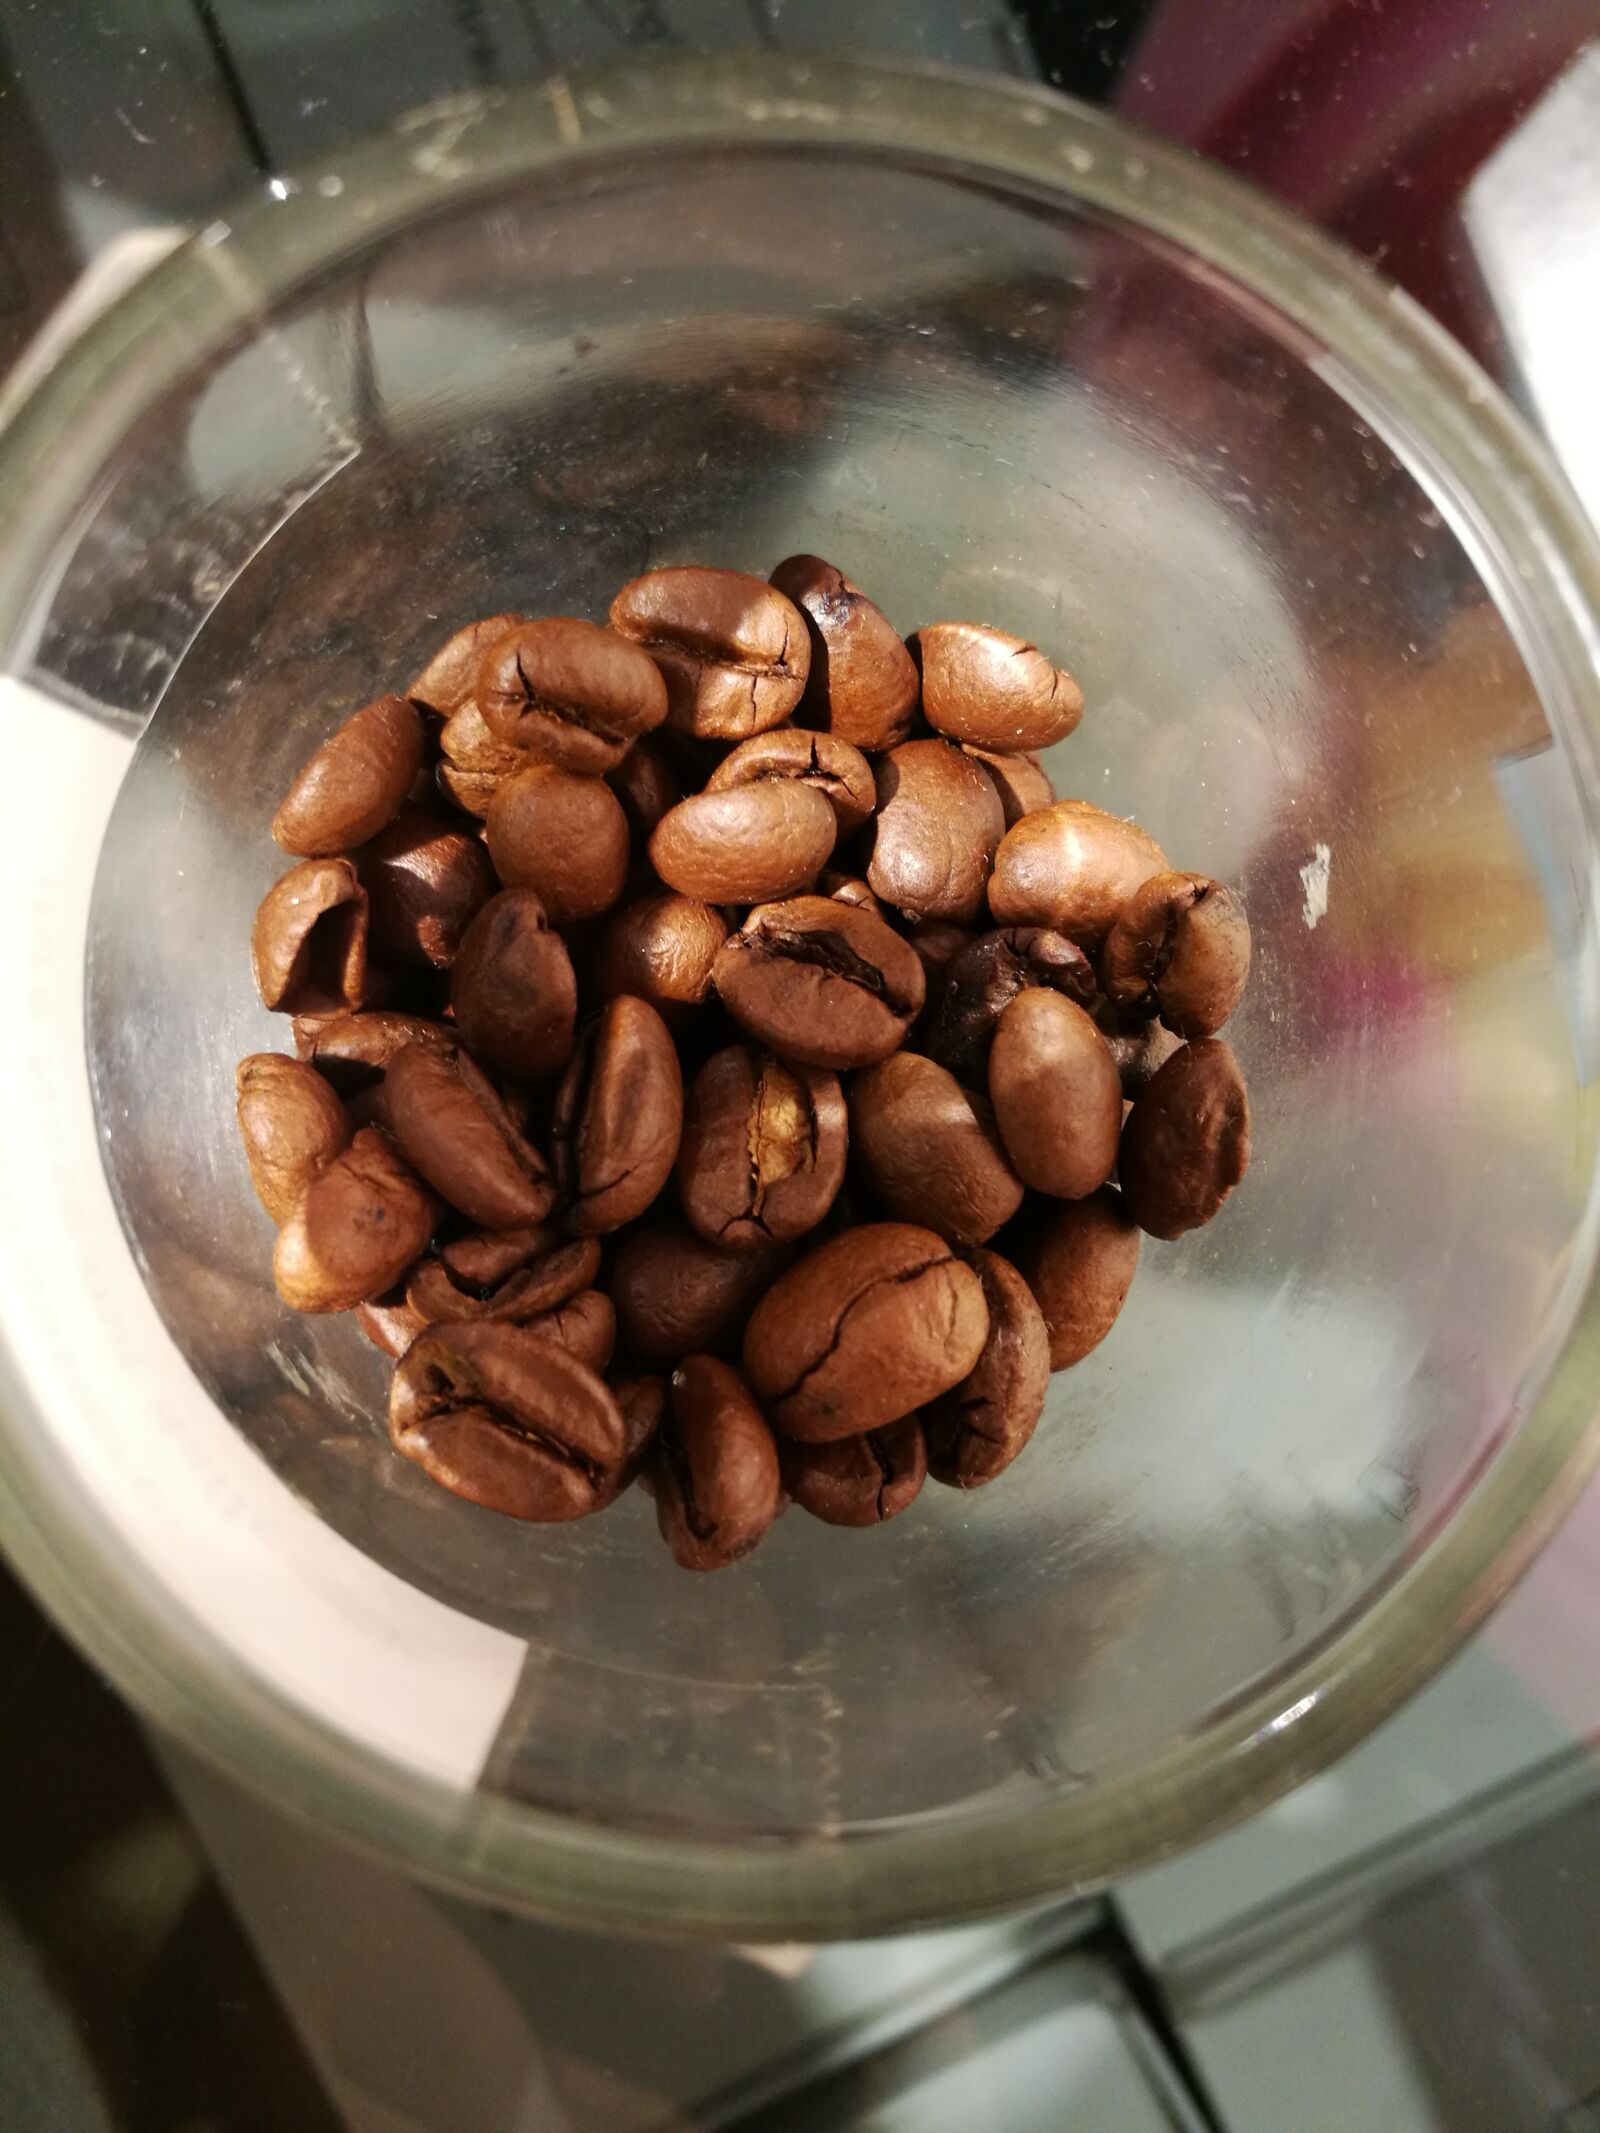 HUAWEI Honor 8 sample photo. Coffee beans, beauty, focus photography